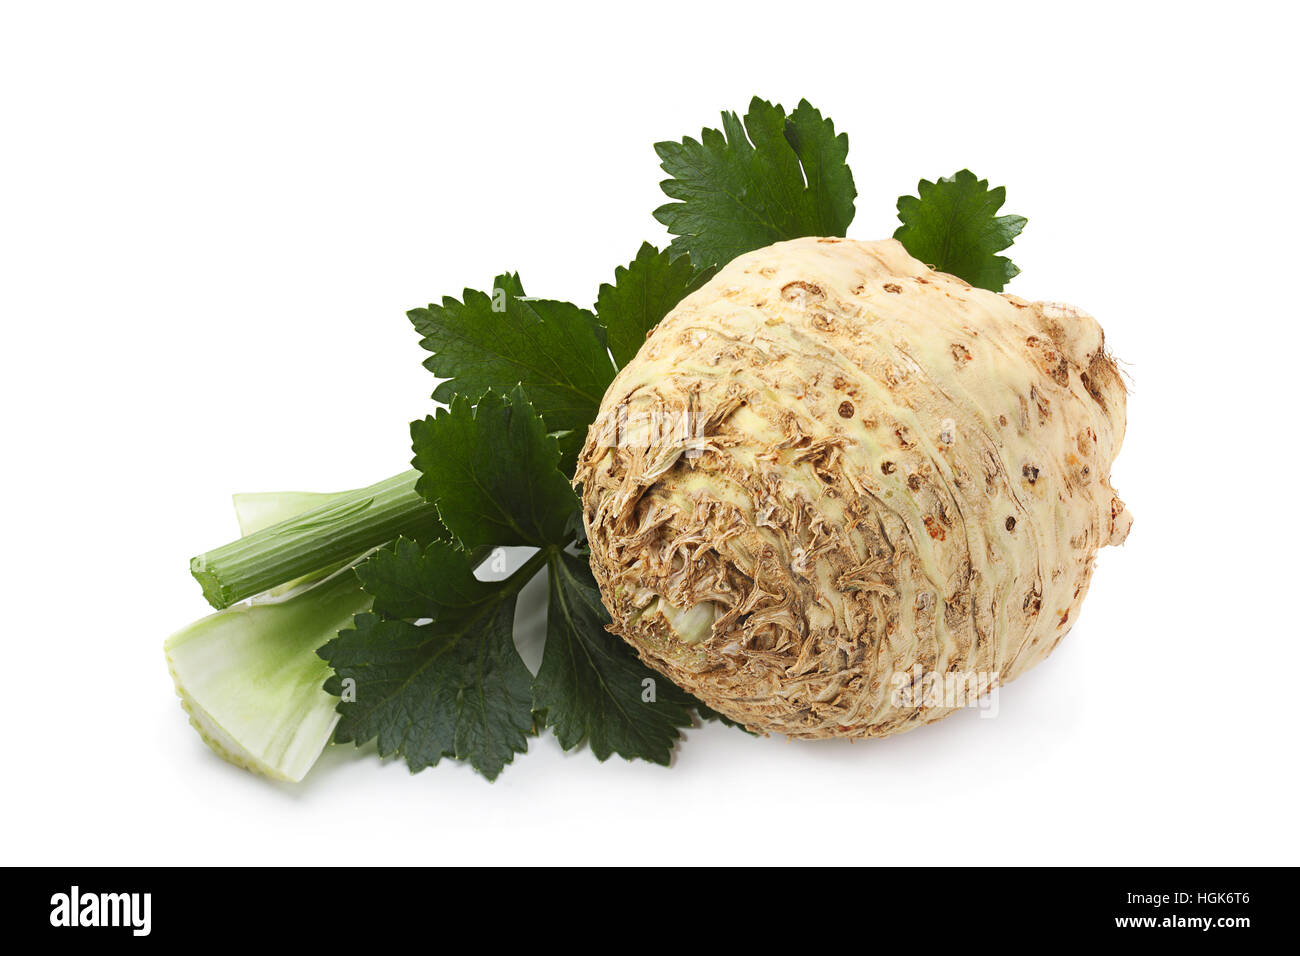 Celery root with leaf isolated on white background Stock Photo